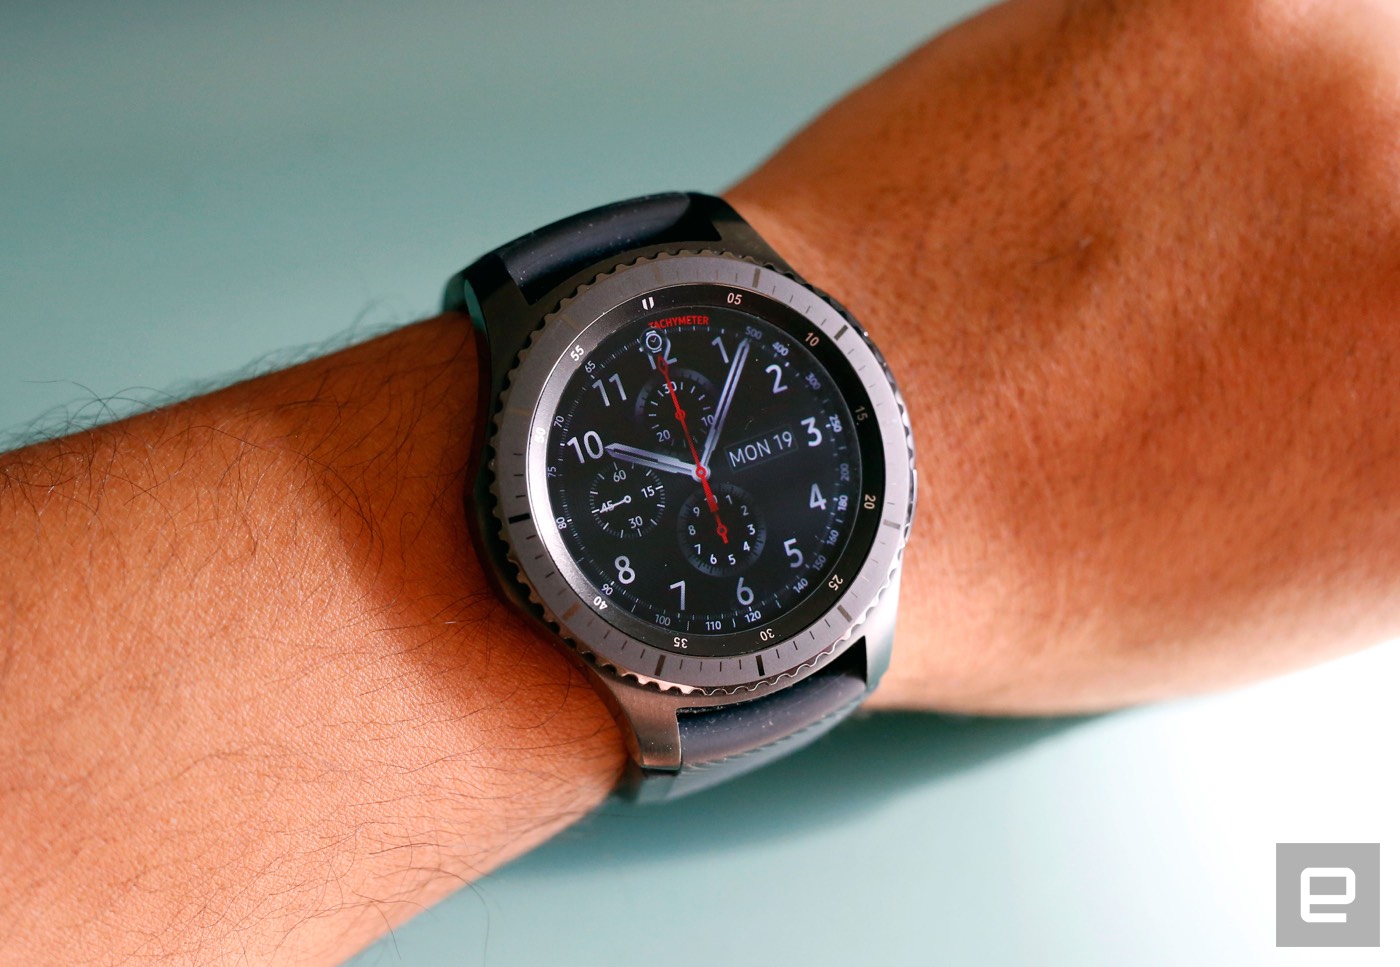 ruimte heelal einde Samsung Gear S3 Frontier review: Lots of features, not enough apps |  Engadget